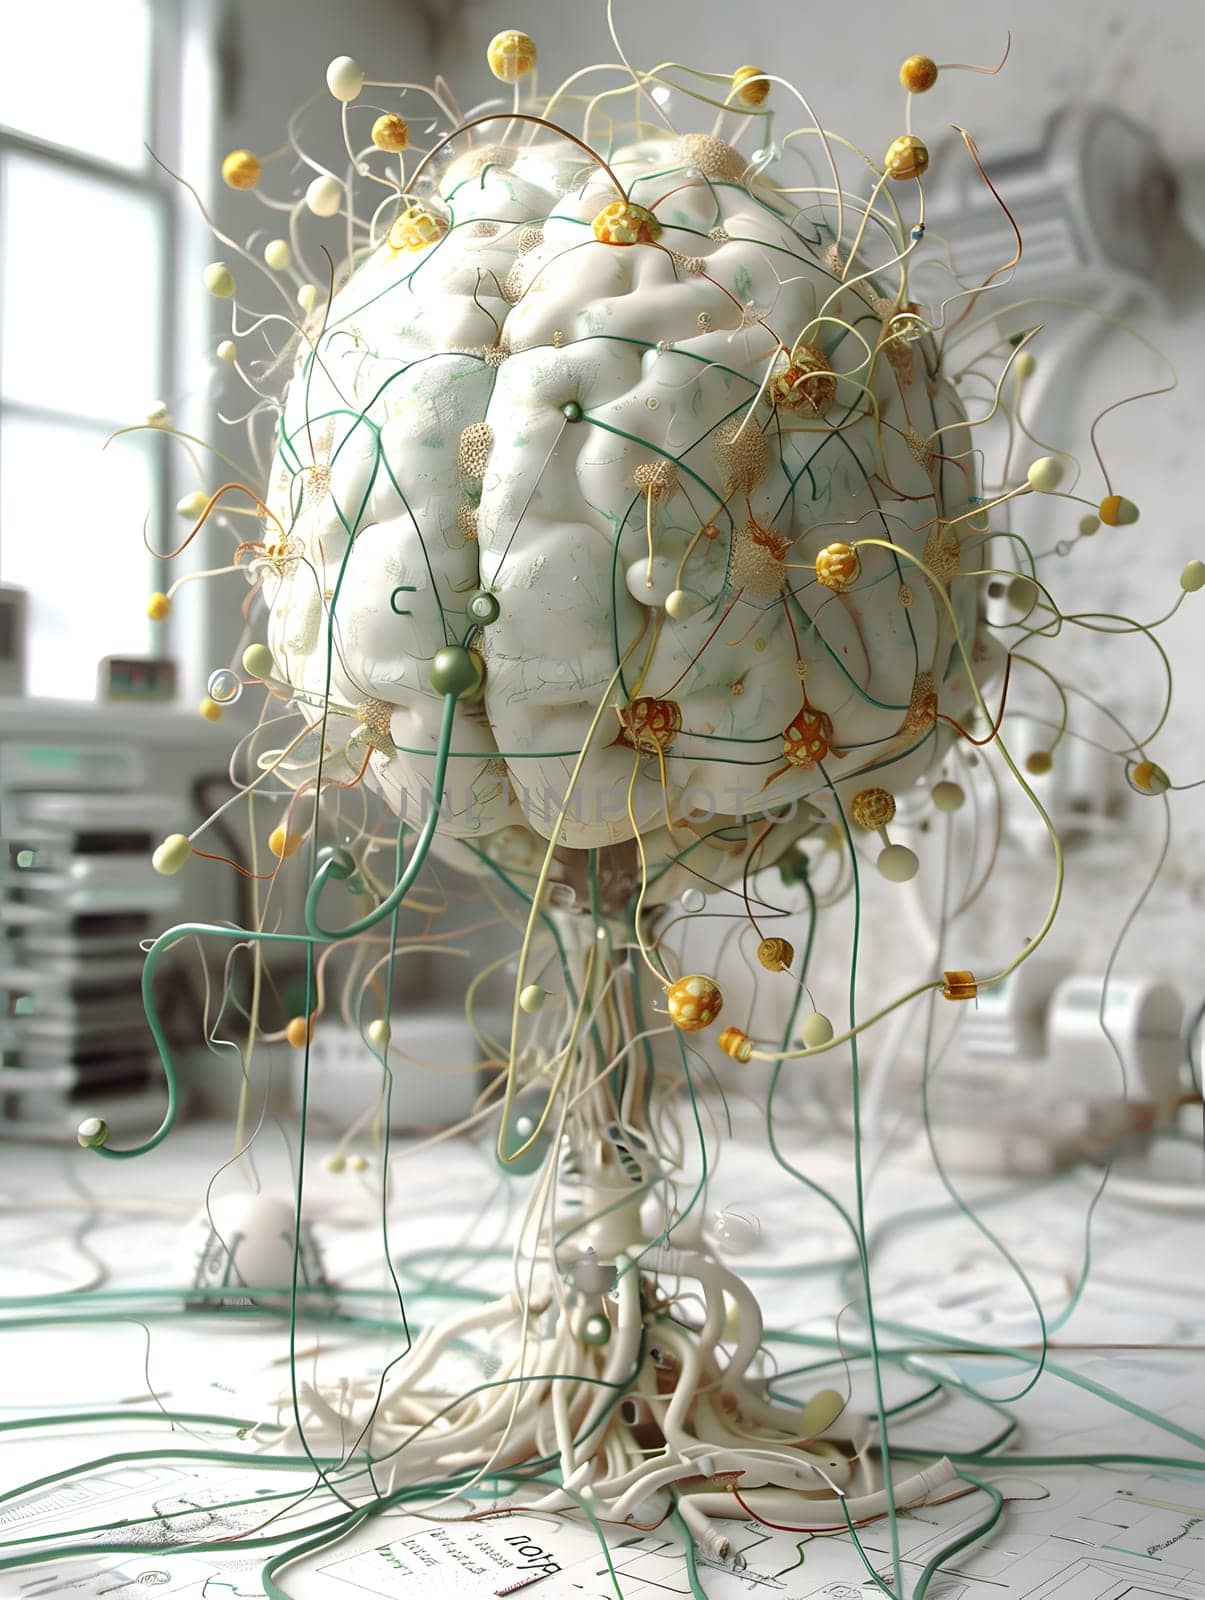 a sculpture of a brain surrounded by wires and flowers by Nadtochiy